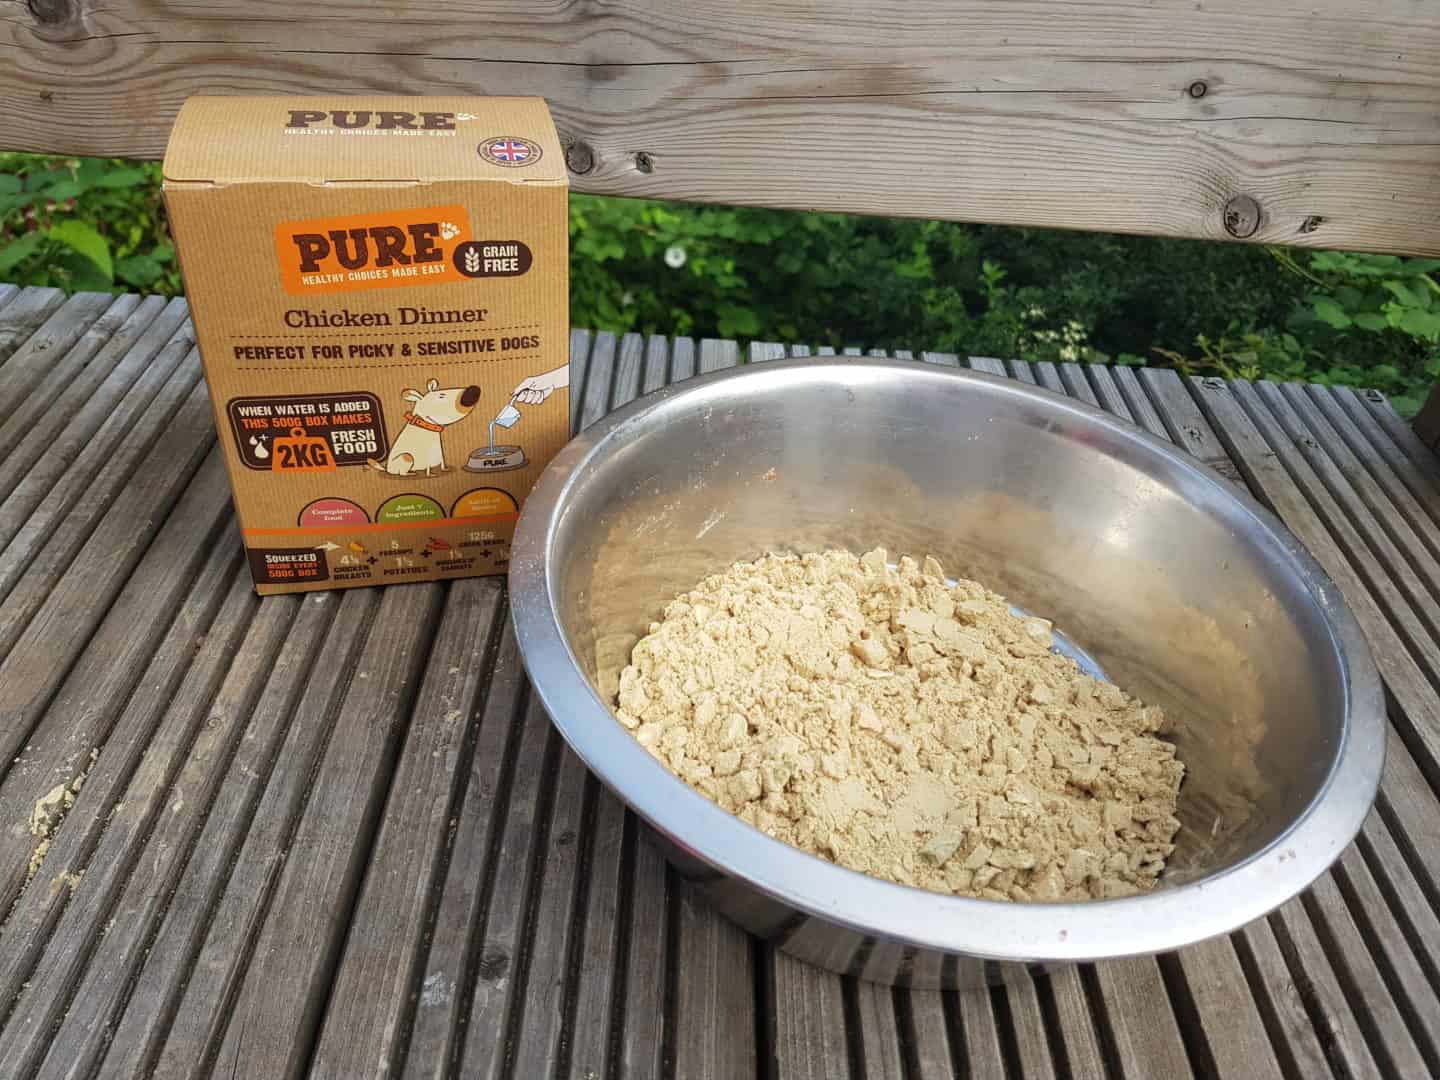 Dehydrated Pure Pet Food in a white metal bowl next to a box of Pure Dog Food.